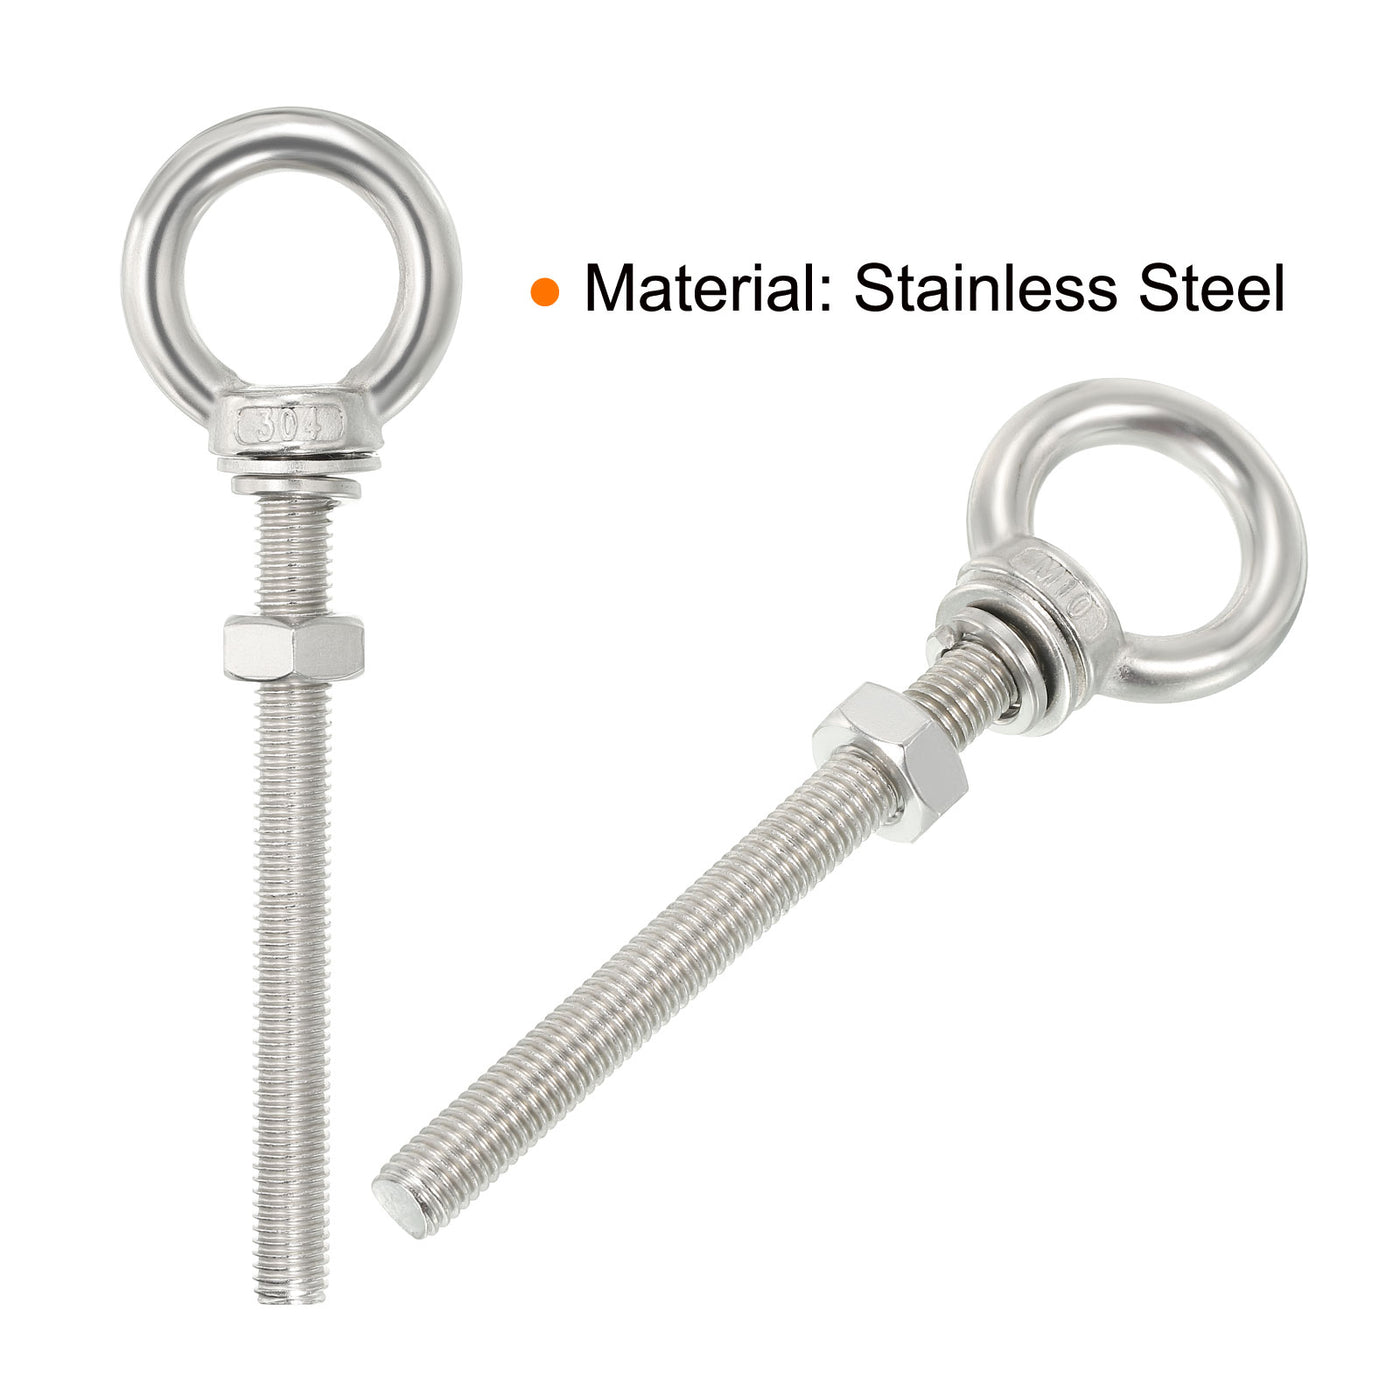 uxcell Uxcell M10x100 3/8"x4" Stainless Steel Eye Bolts Threaded Screw Eyebolt Shoulder Ring with Nuts Washers for Lifting Hanging, 2 Set